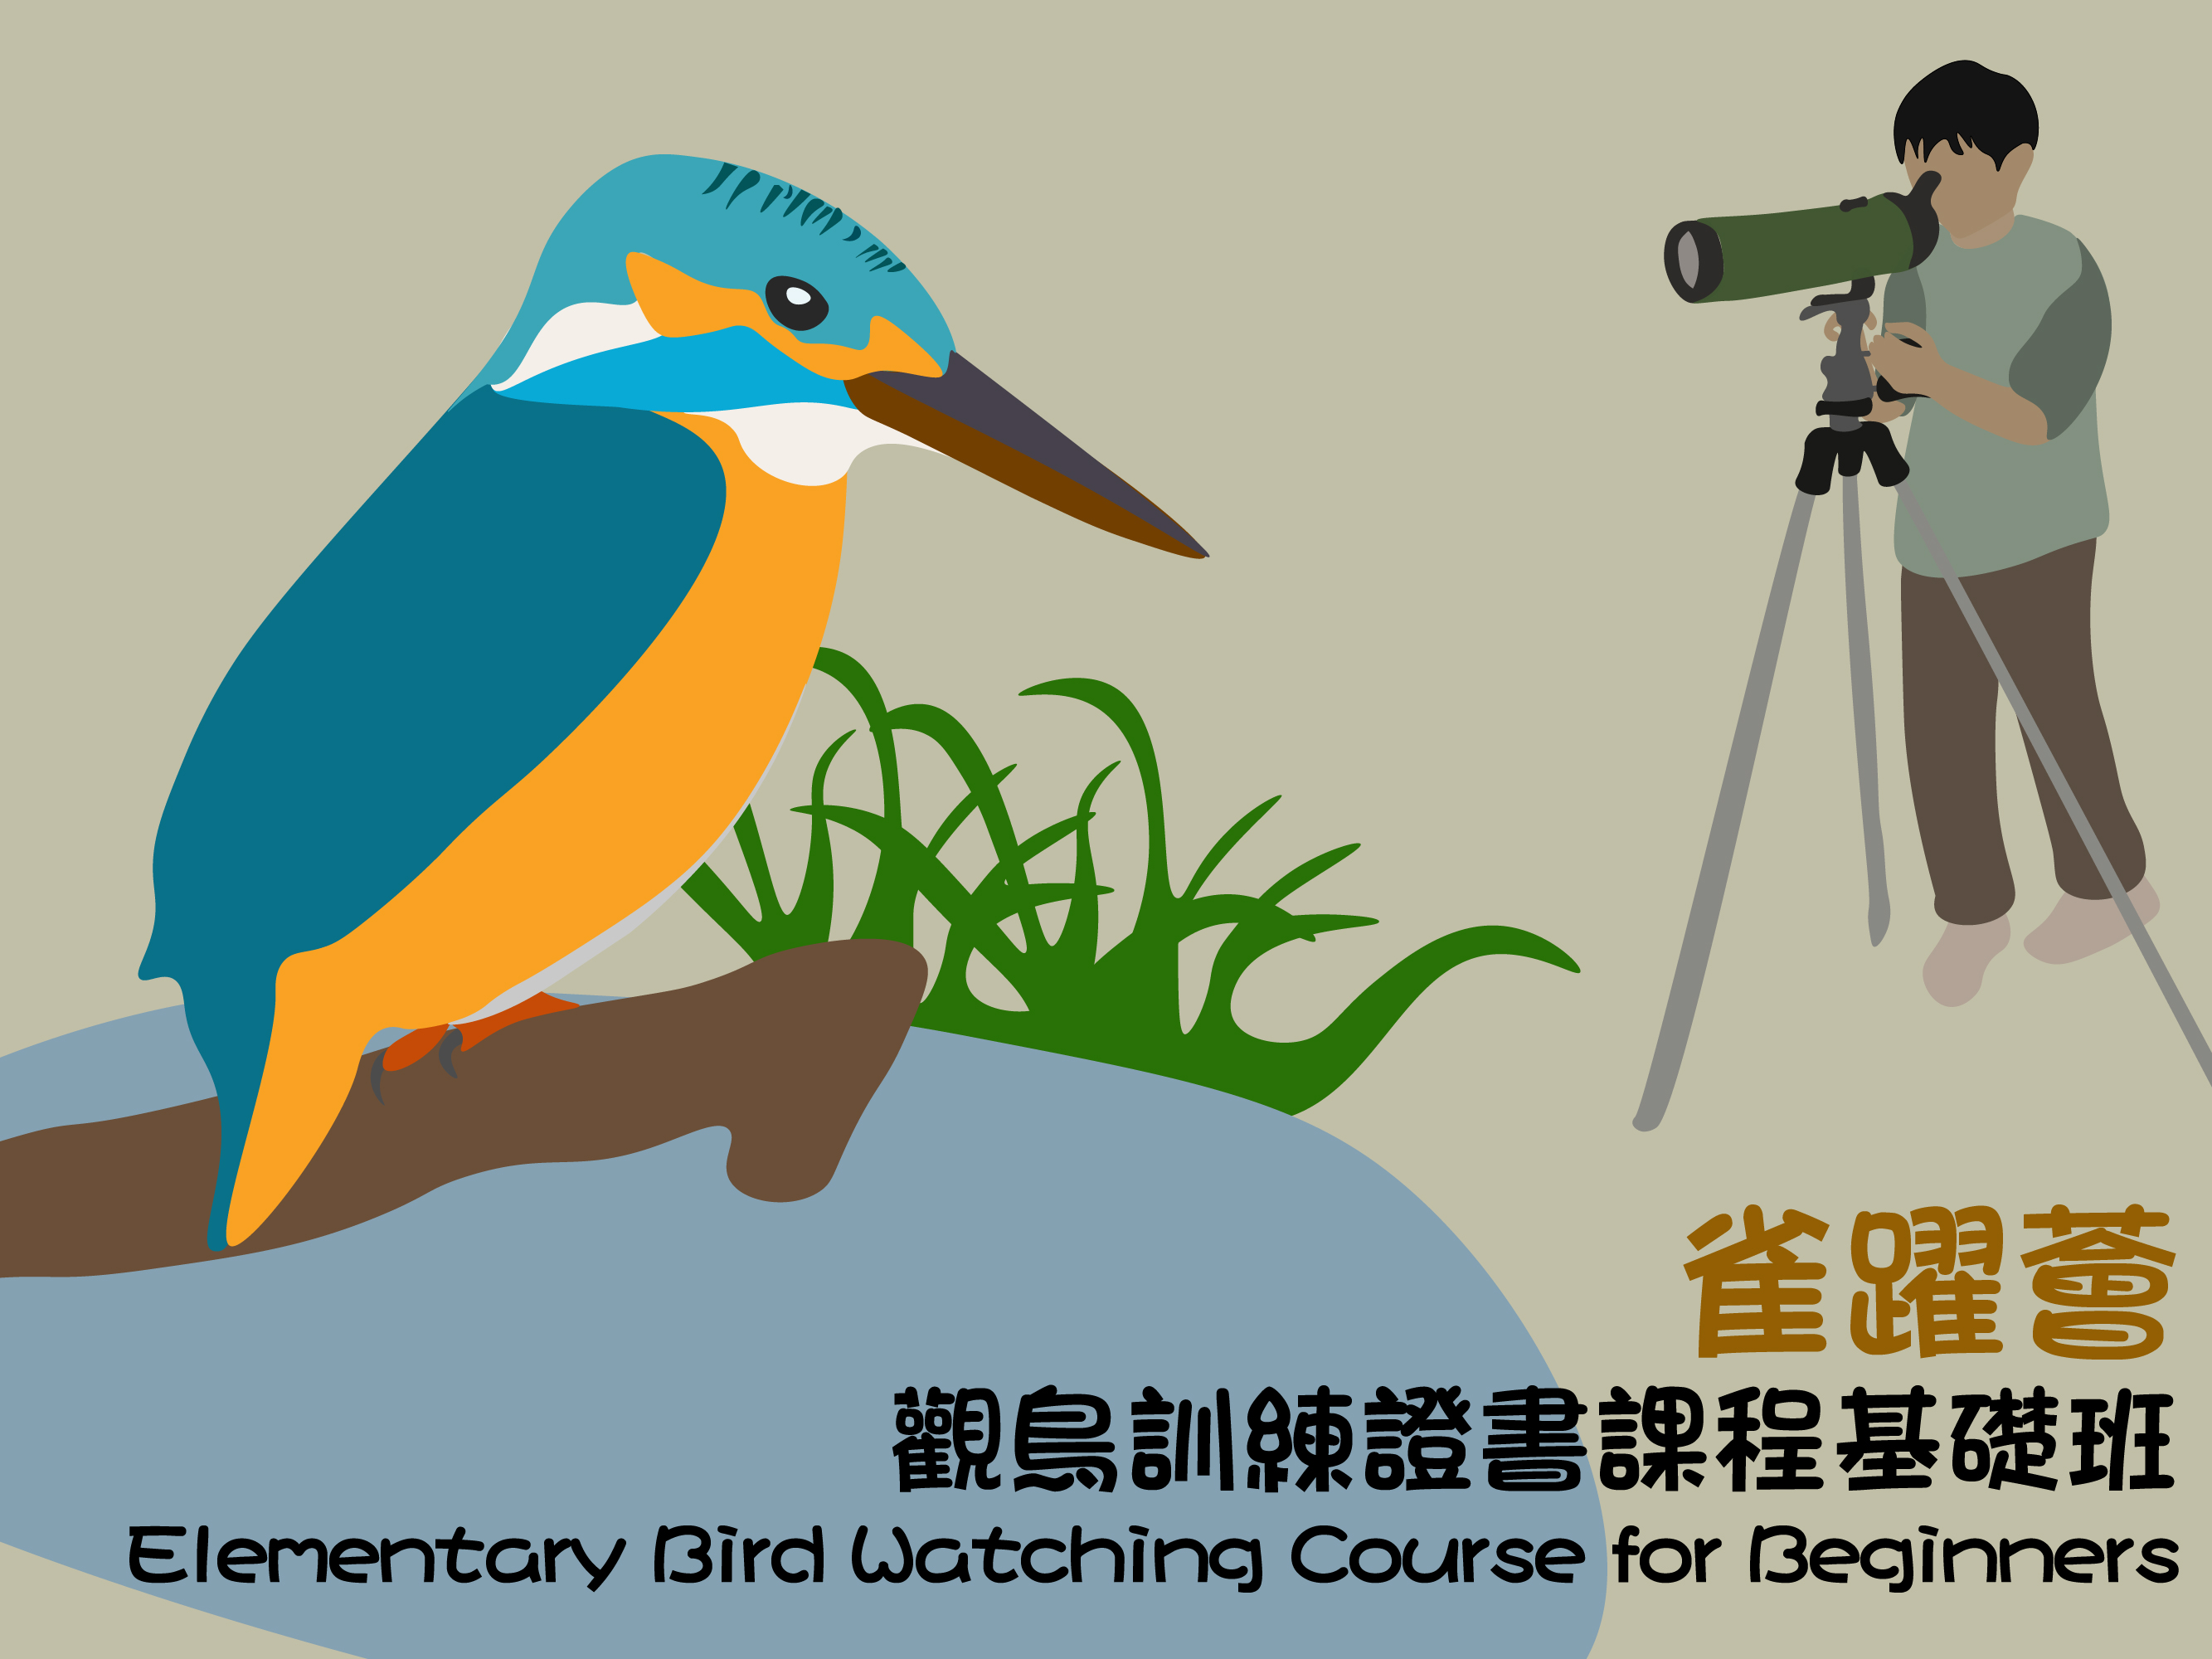 Elementary Bird Watching Course for Beginners